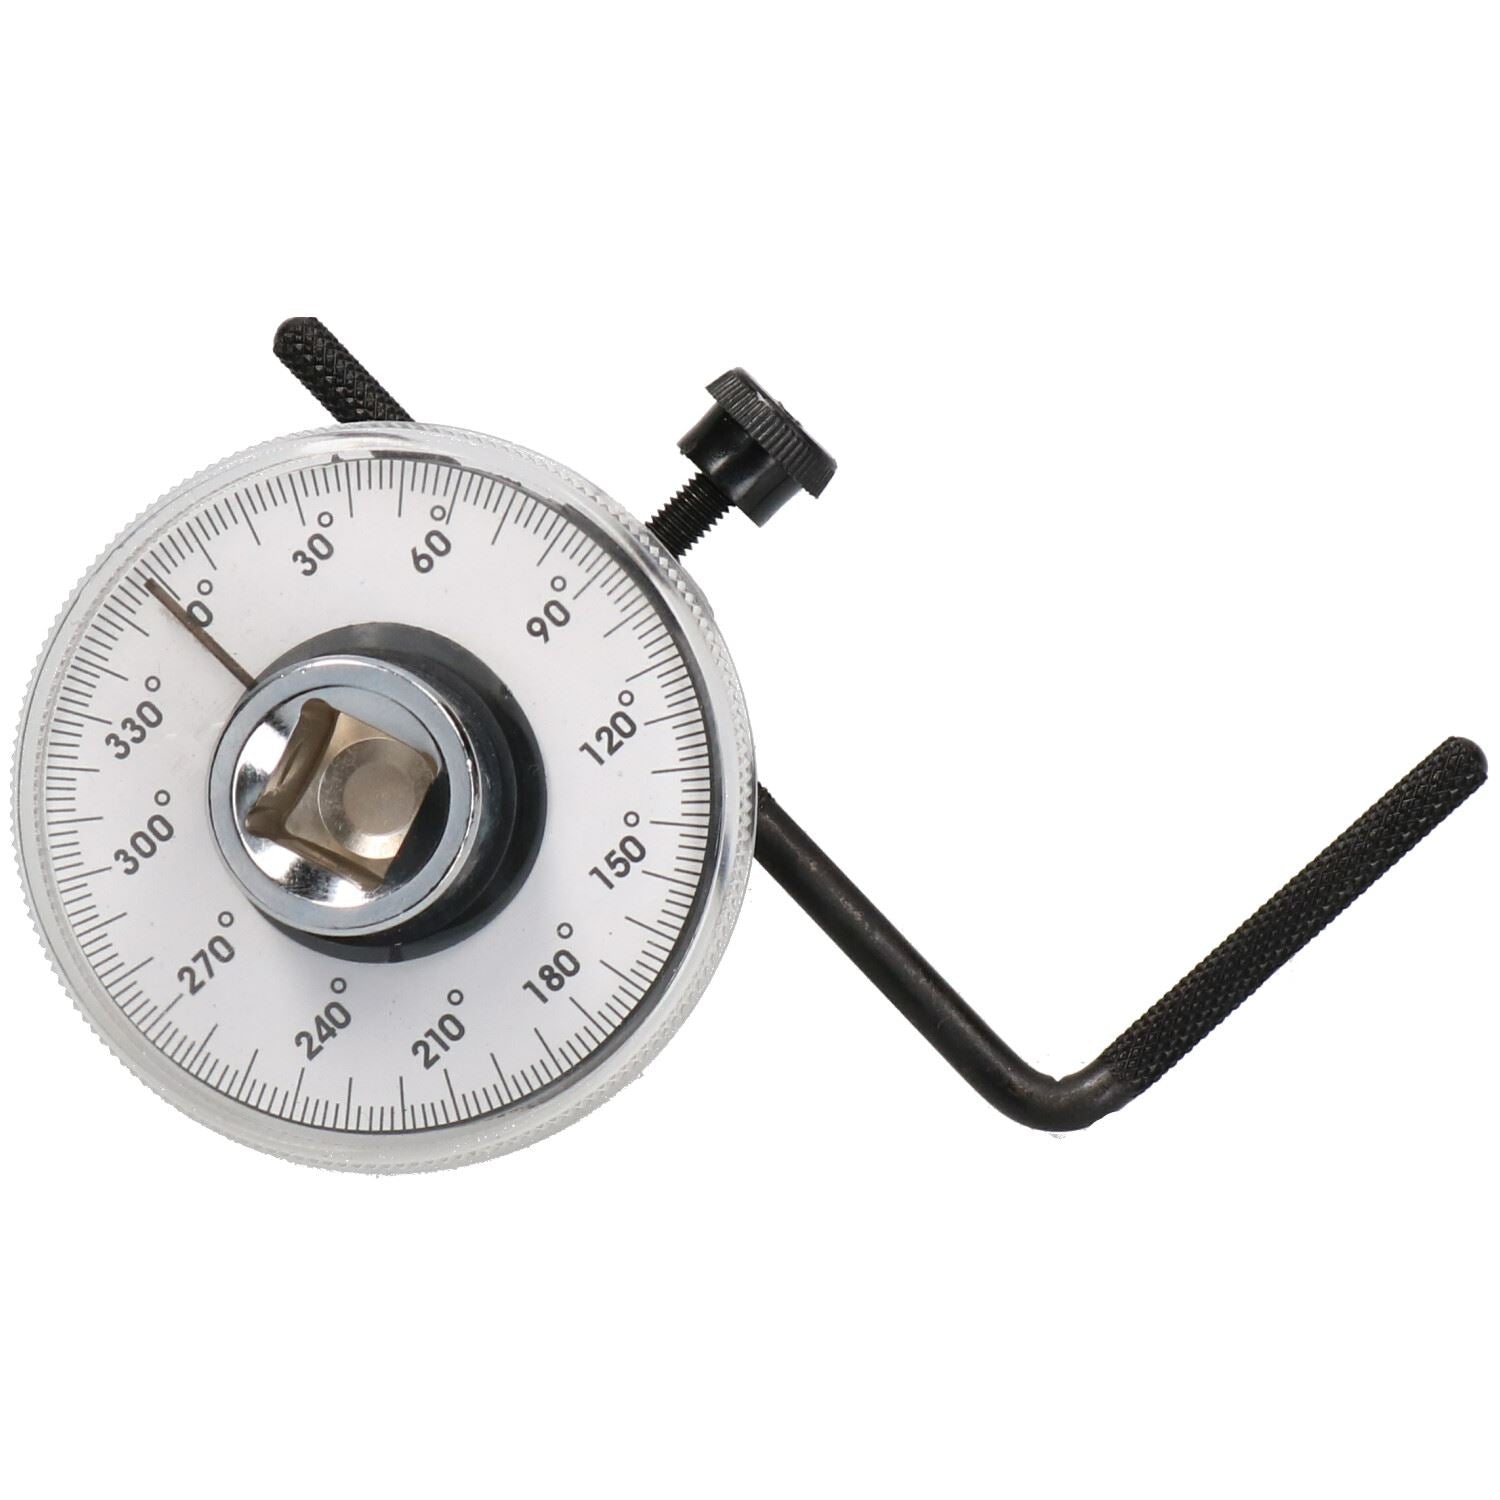 1/2" Drive Torque Angle Gauge for Torque Wrench Power Bars Cars Vans